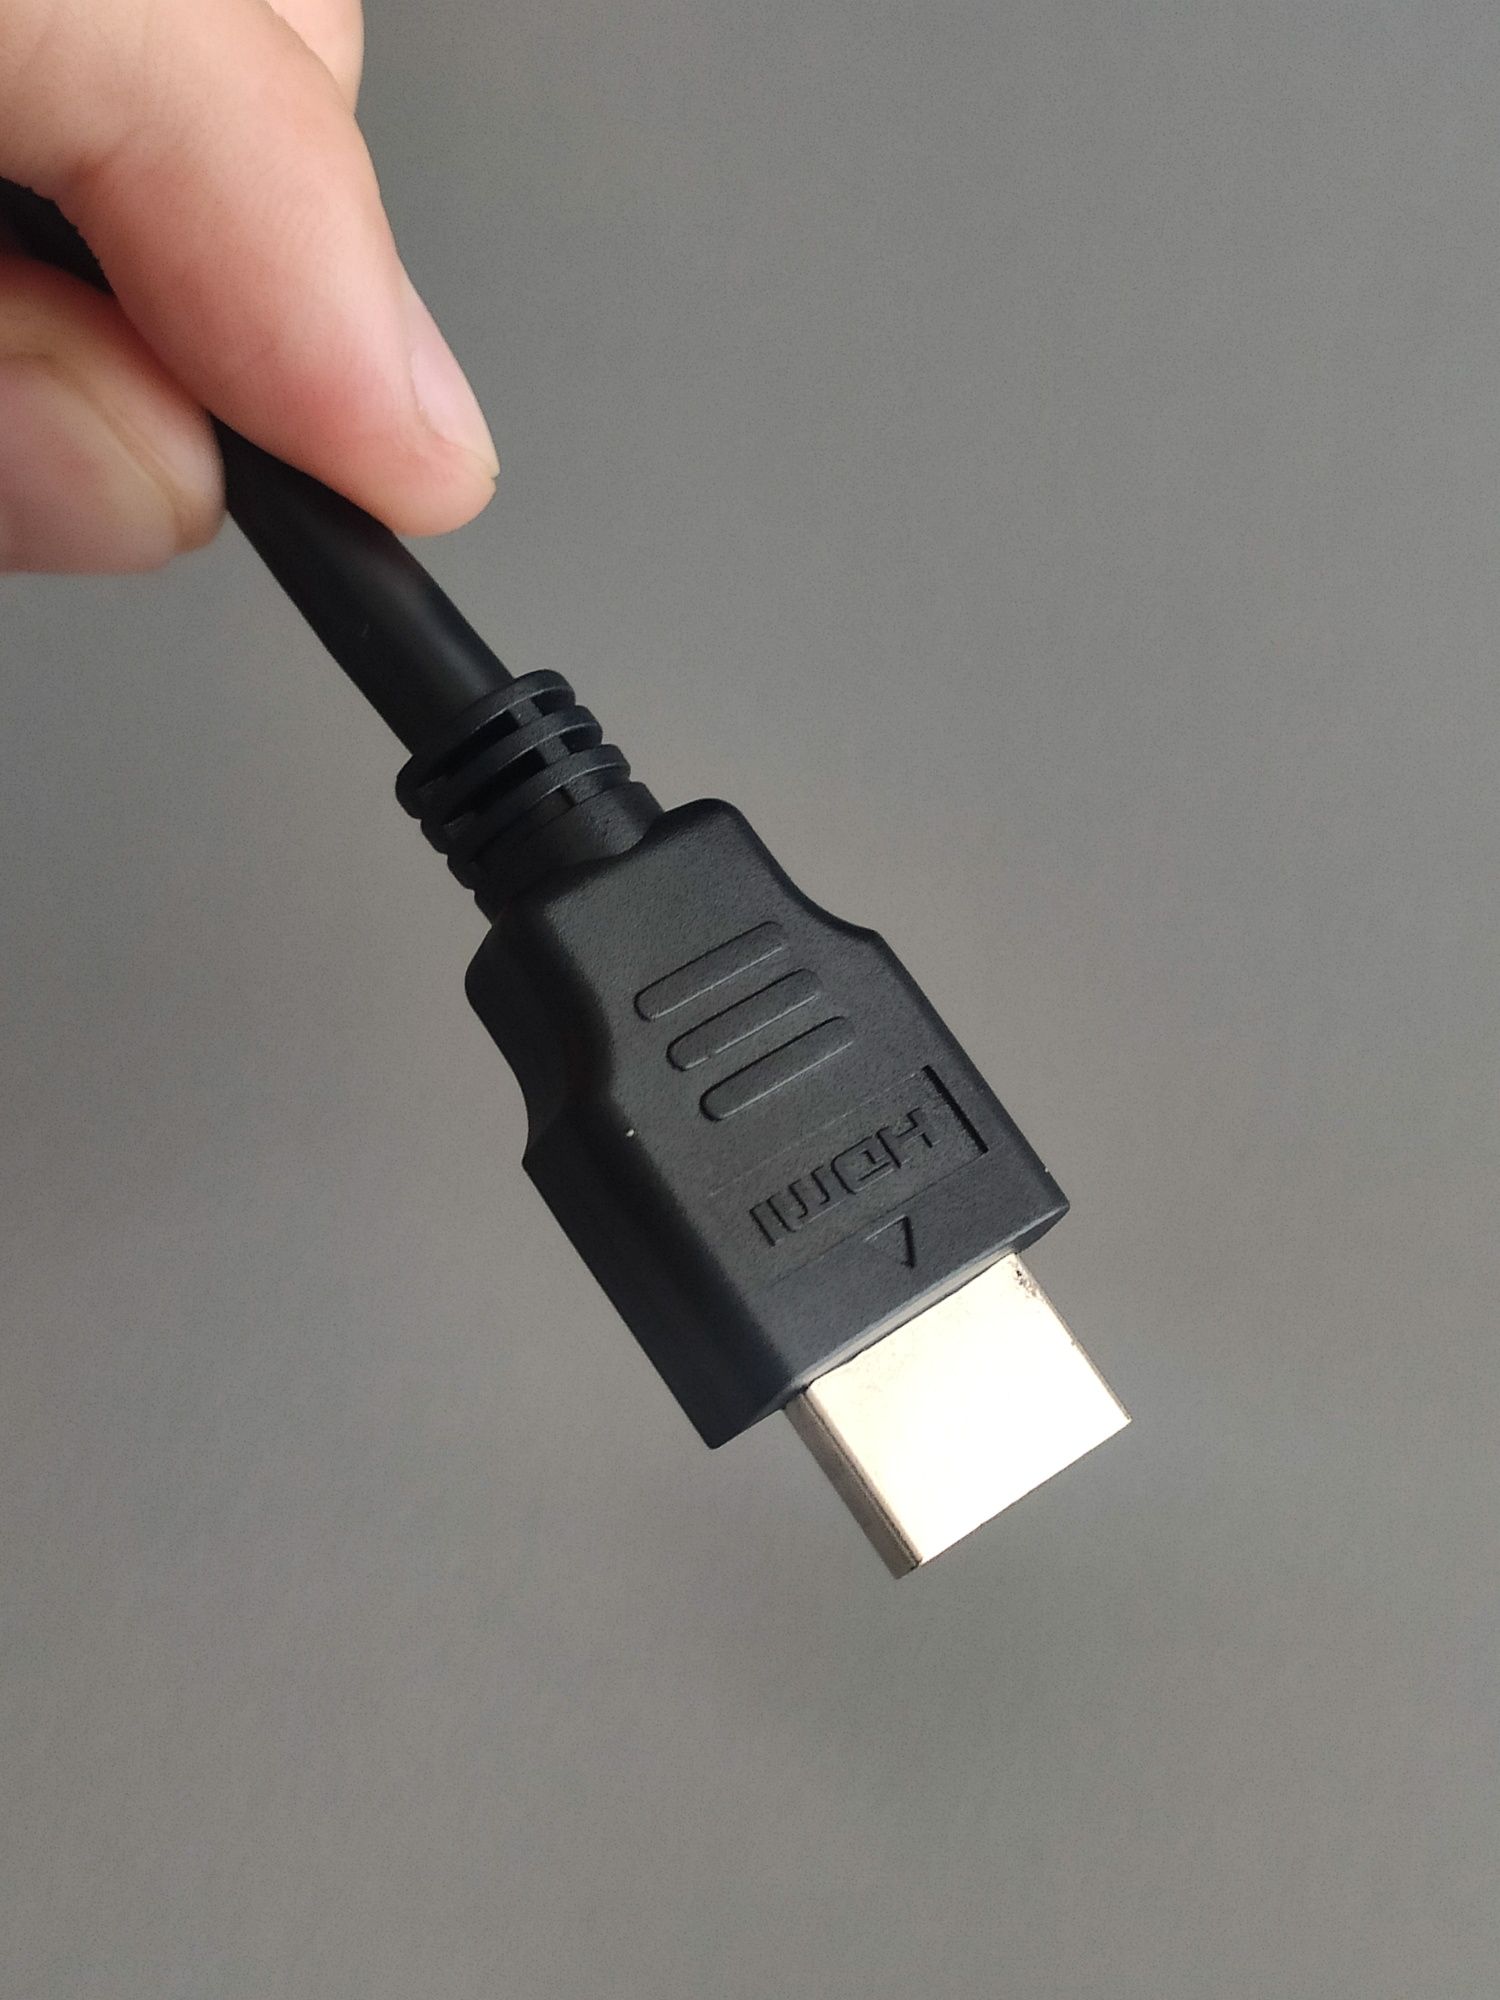 HDMI (1.6 m) high speed cable with ethernet (80°C, 30V)